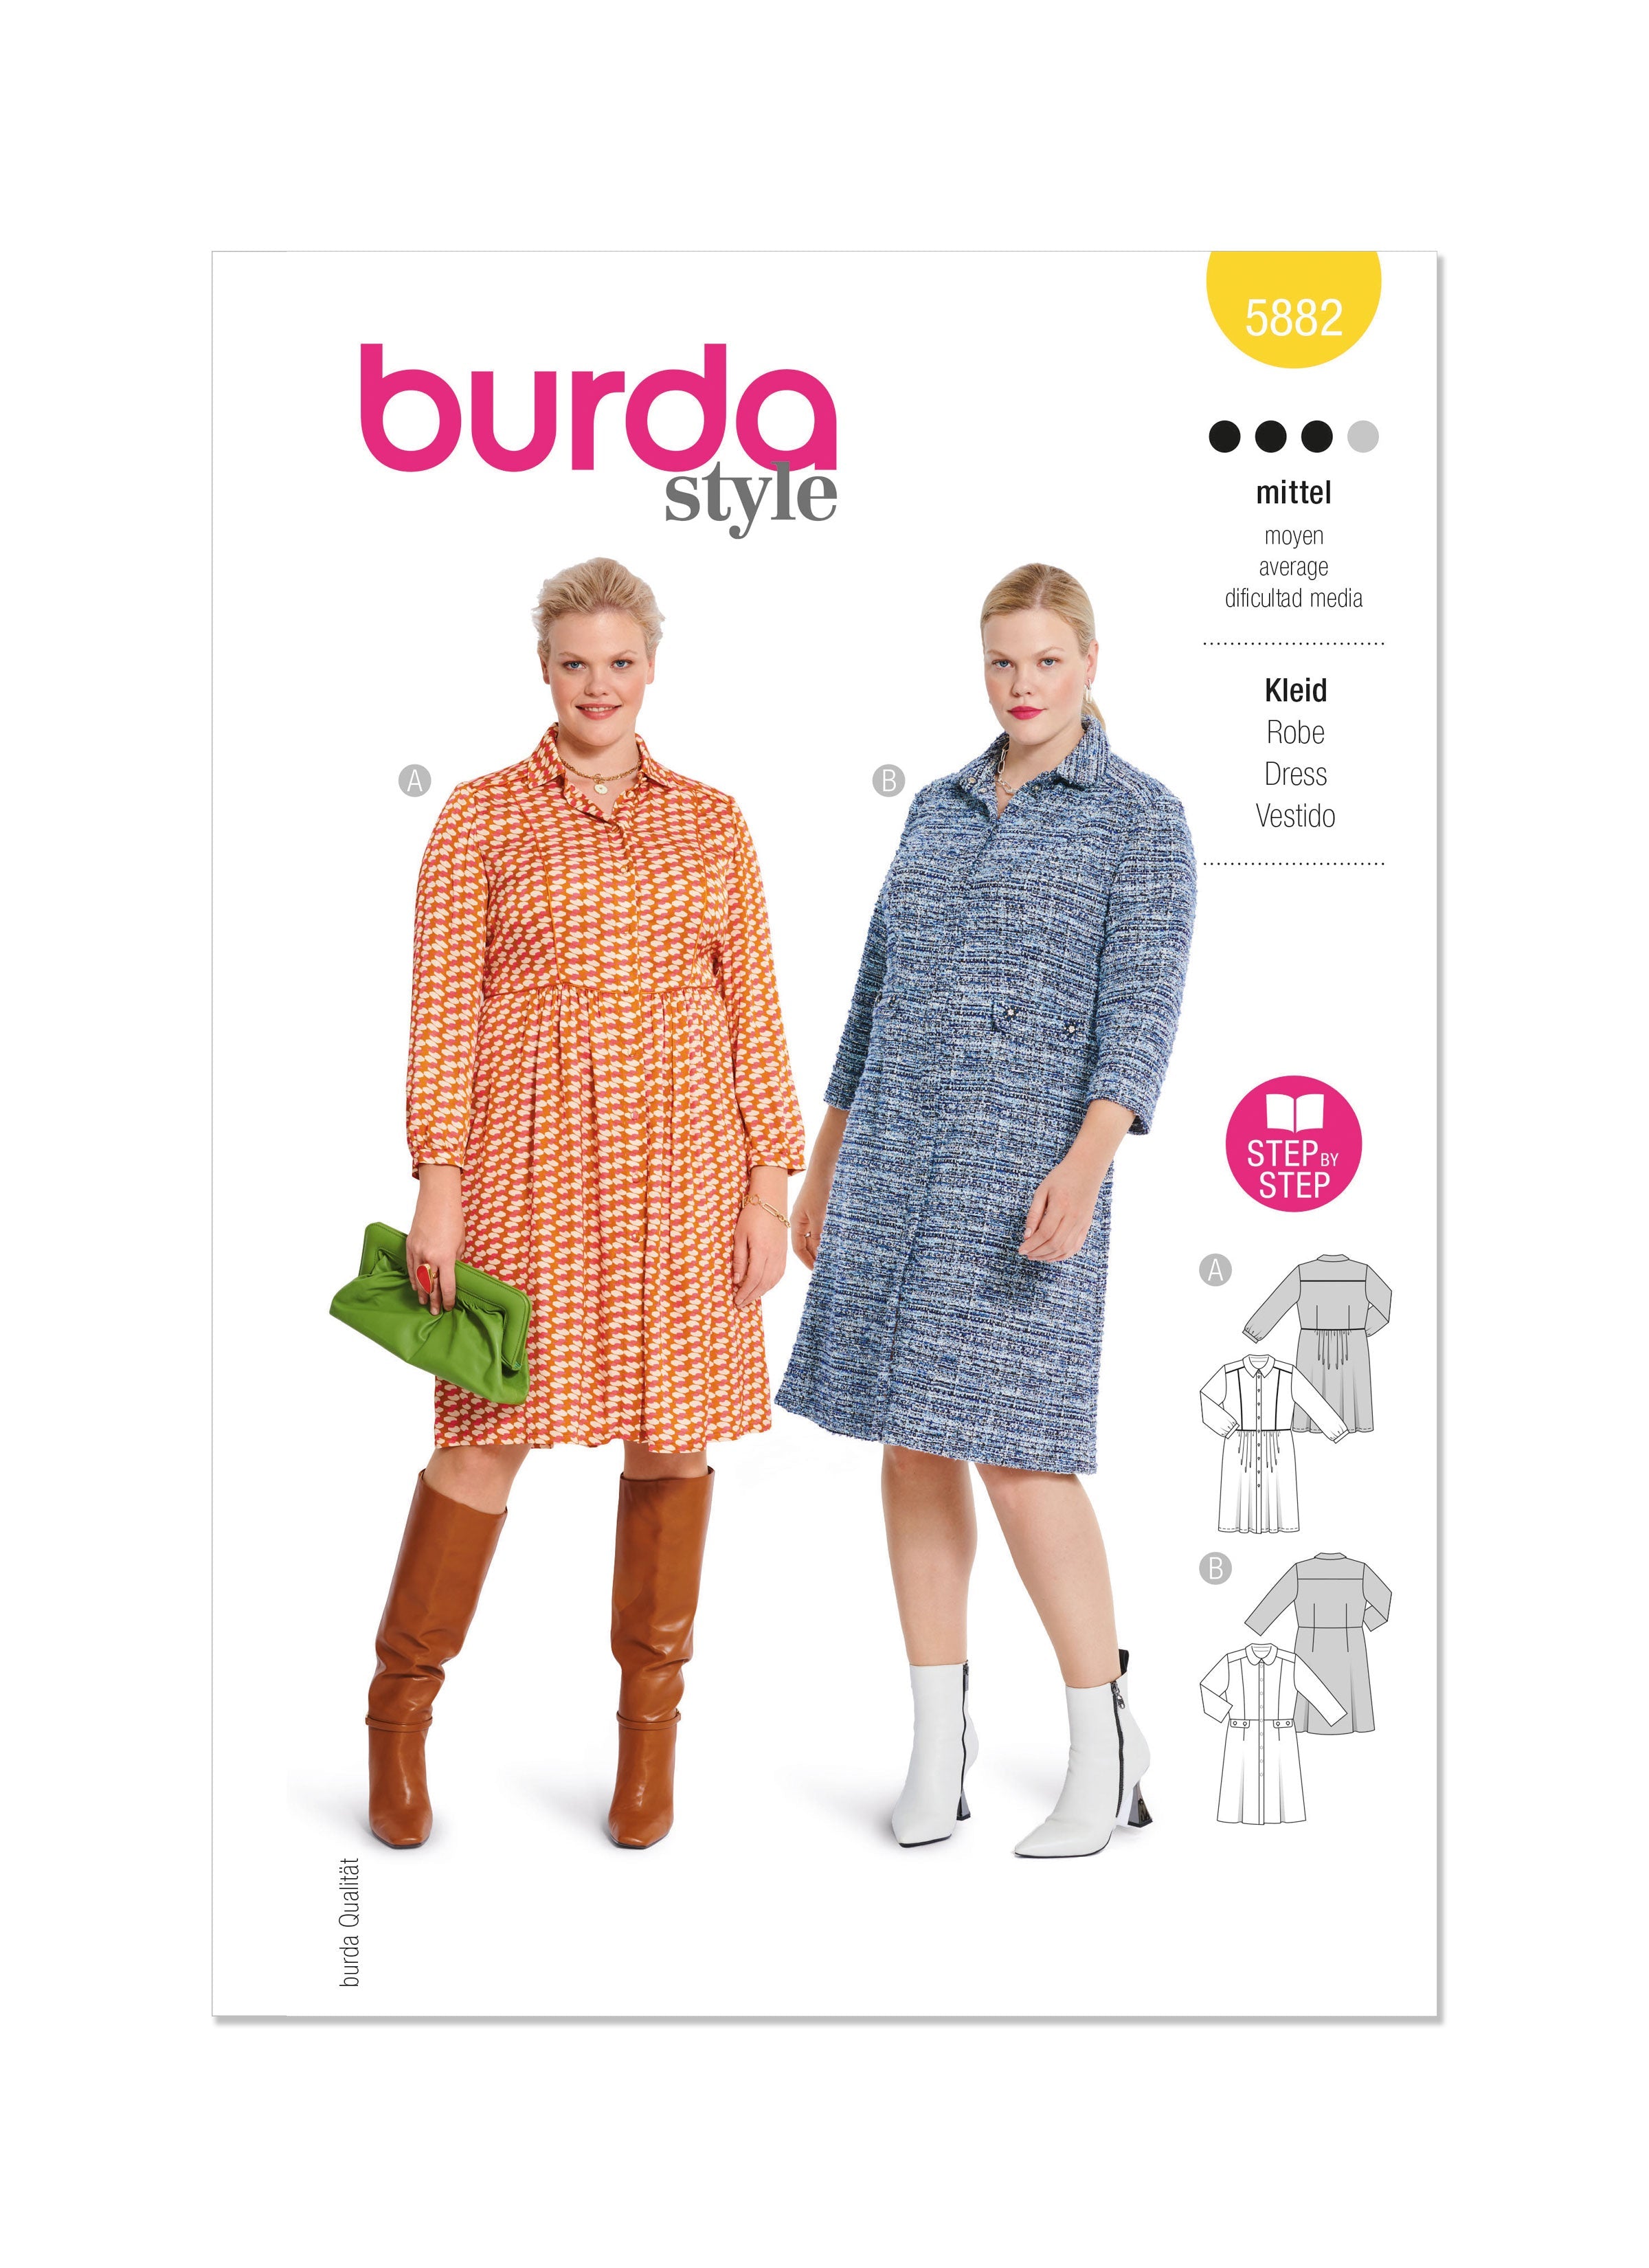 Burda Sewing Pattern 5882 Misses' Dress from Jaycotts Sewing Supplies